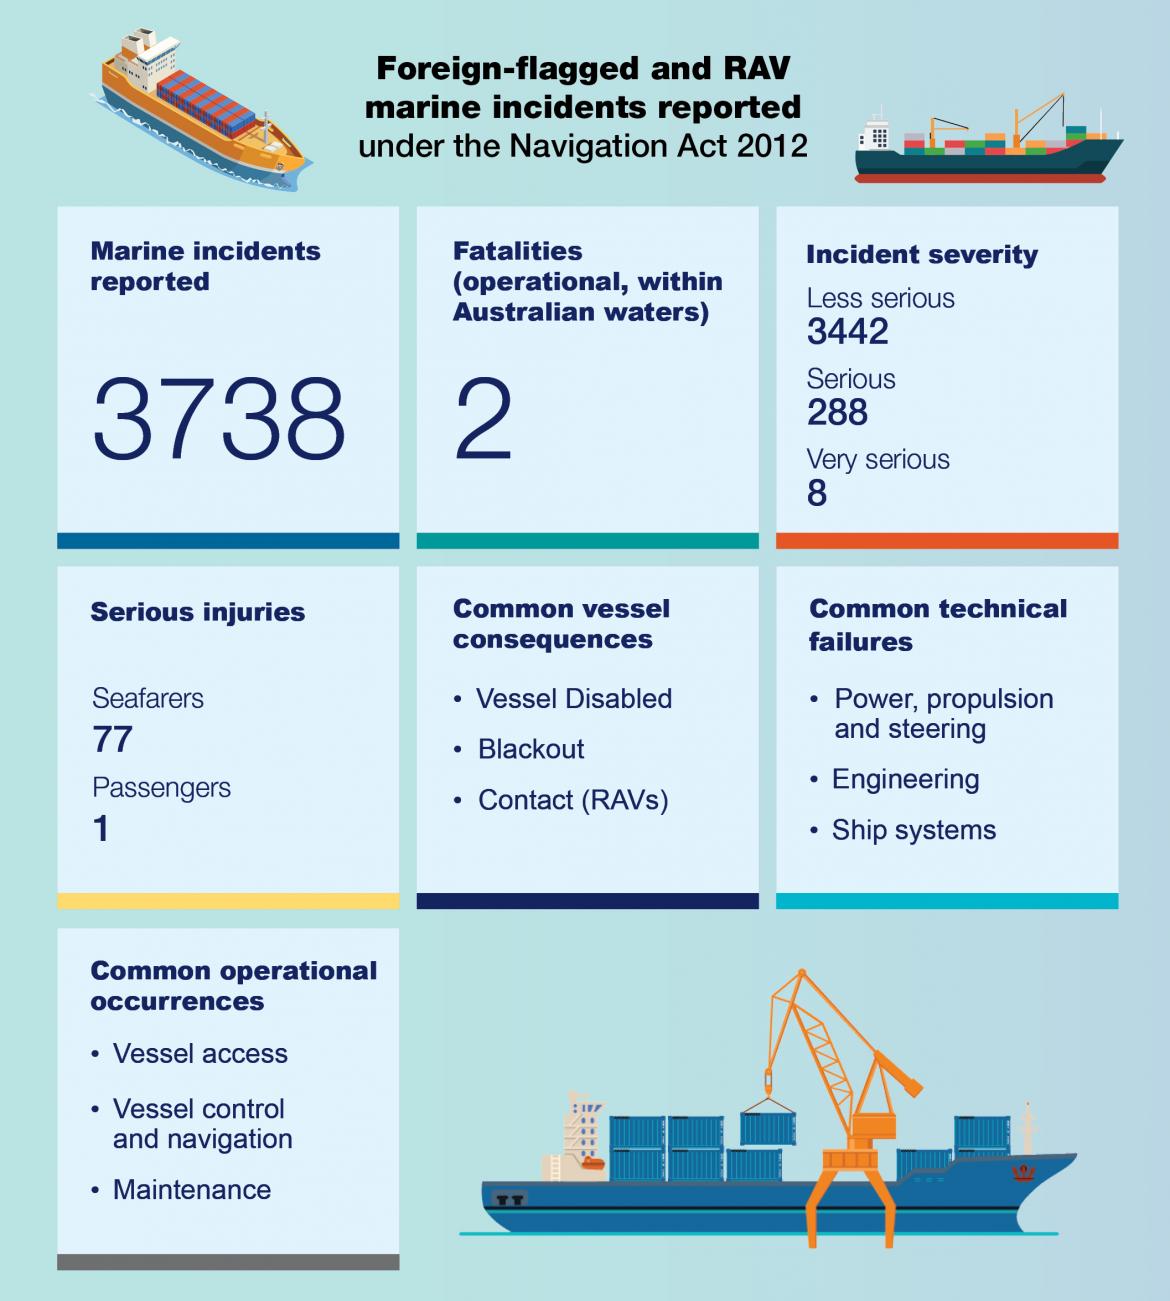 Image 1: Summary of marine incidents reported for foreign-flagged and Regulated Australian Vessels (RAVs) in 2021